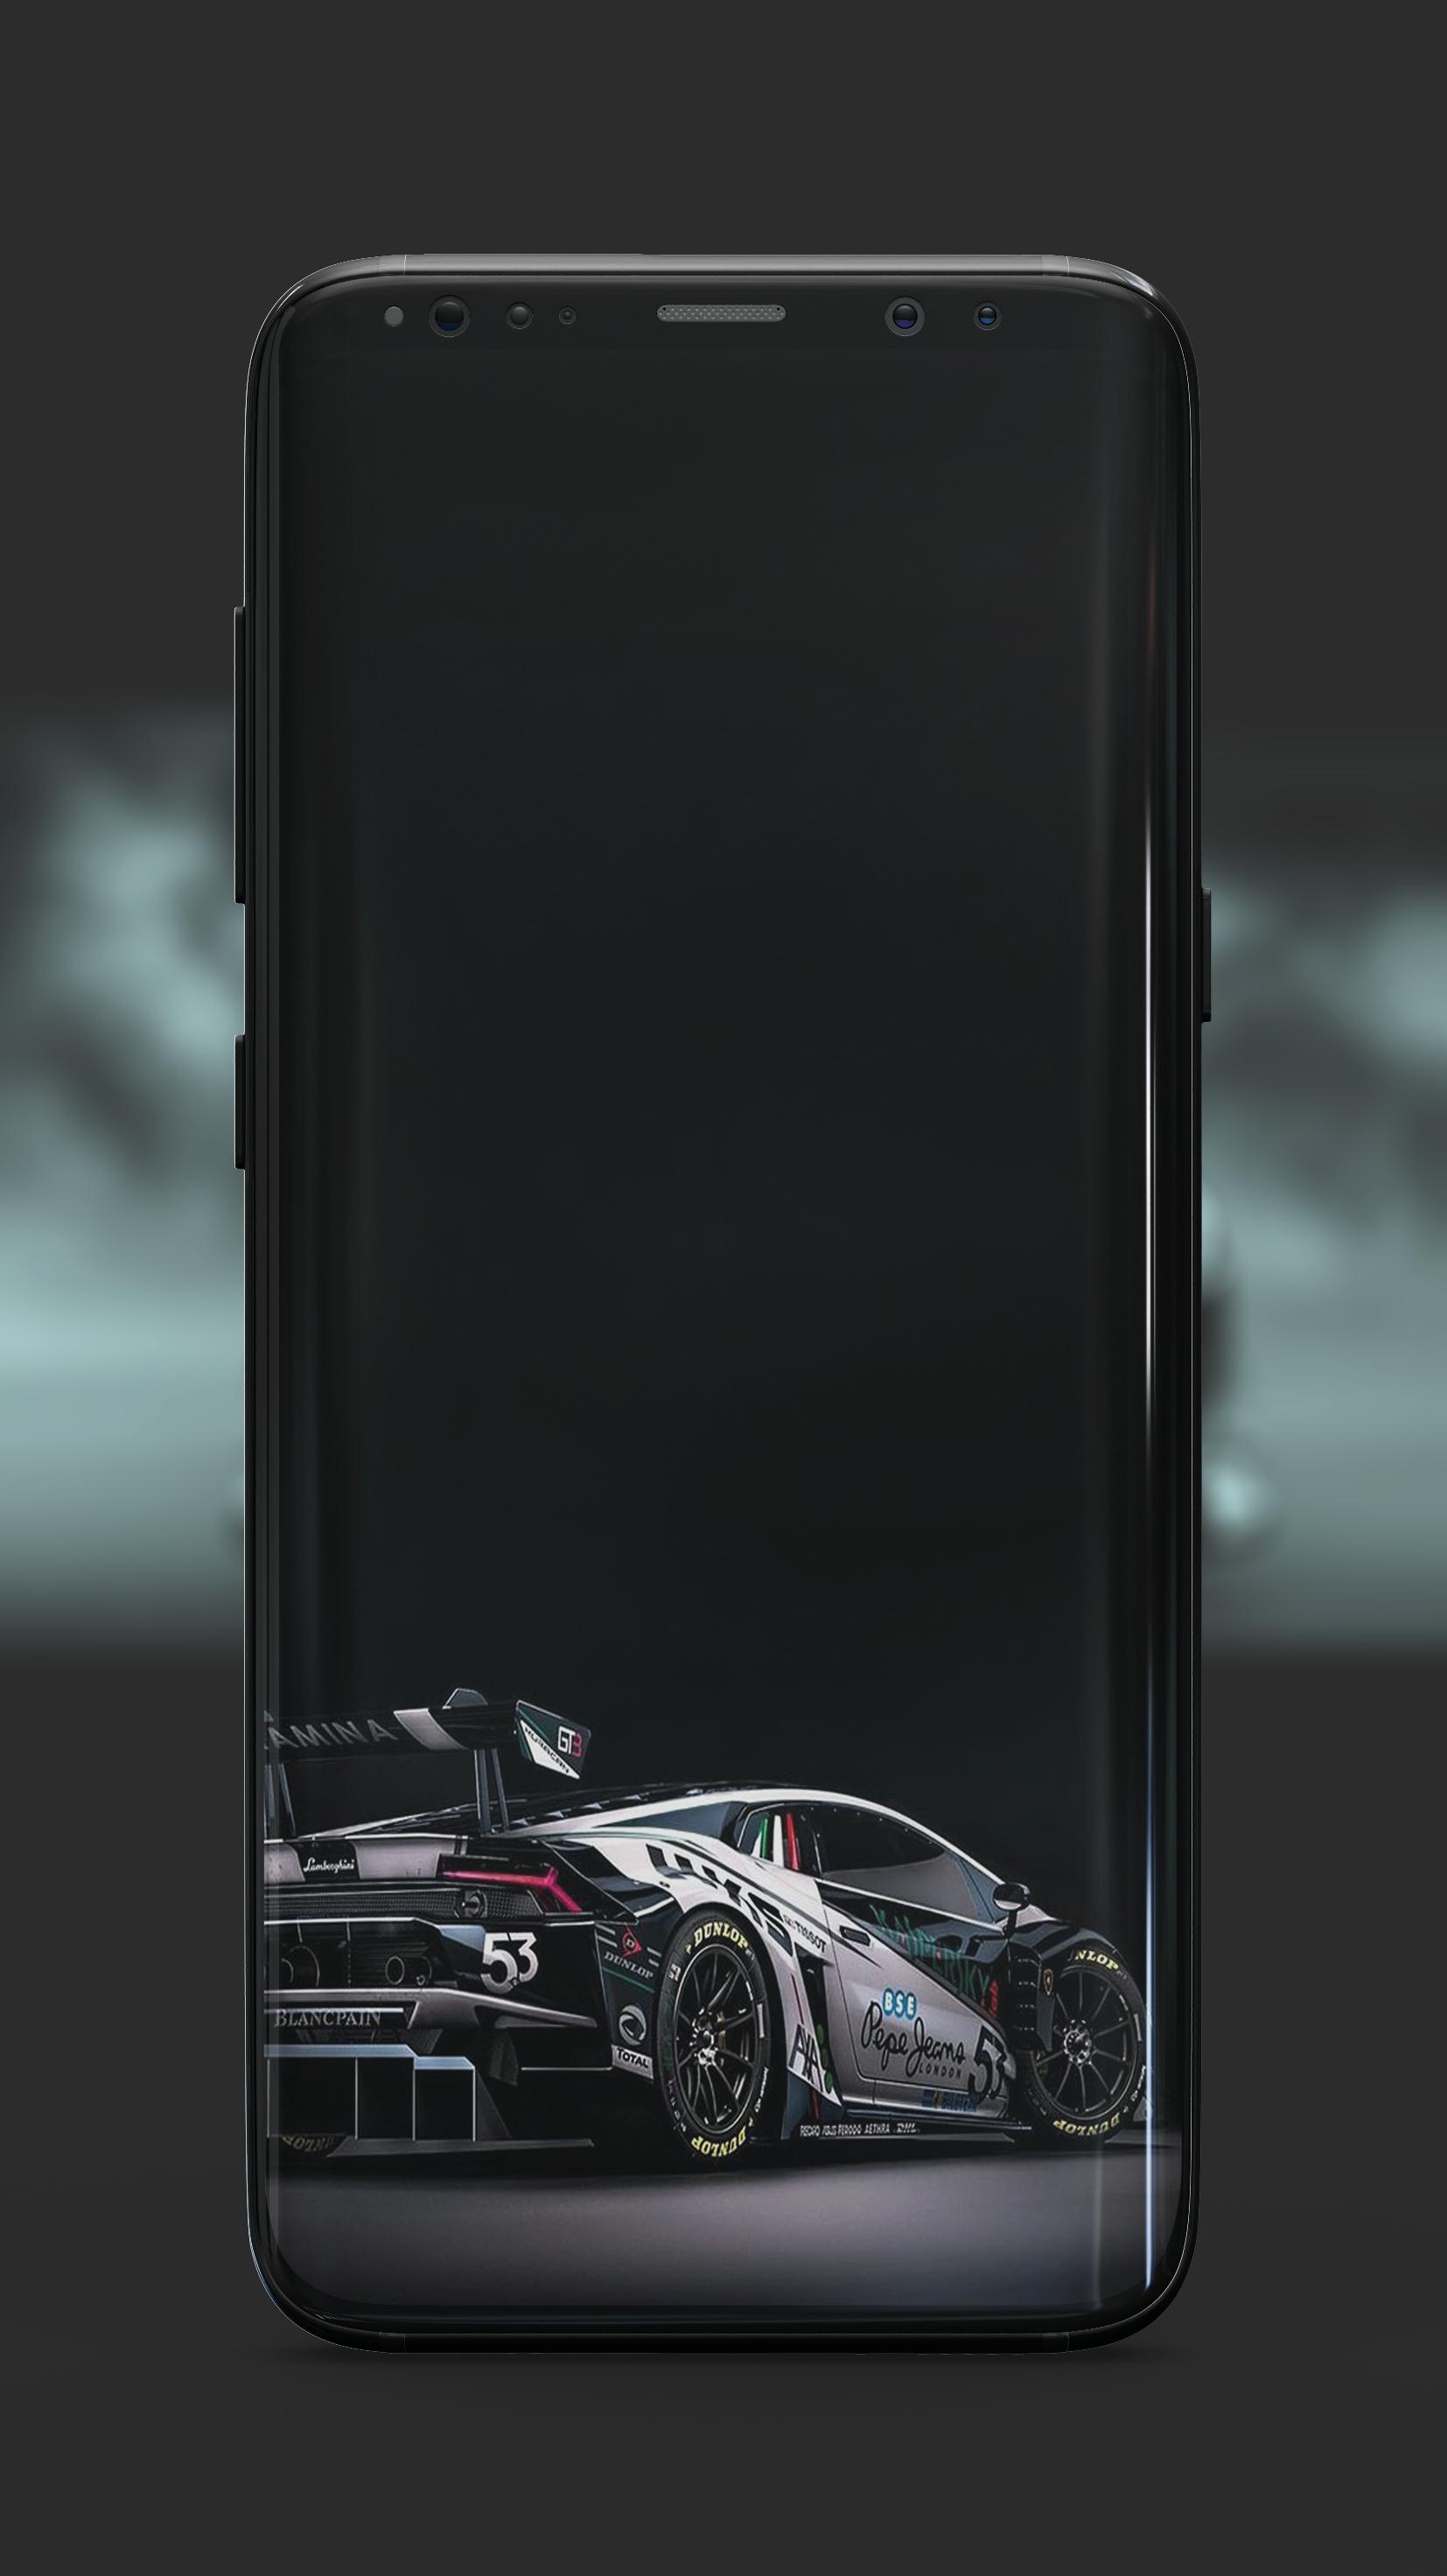 Hd Car For Mobile Wallpapers